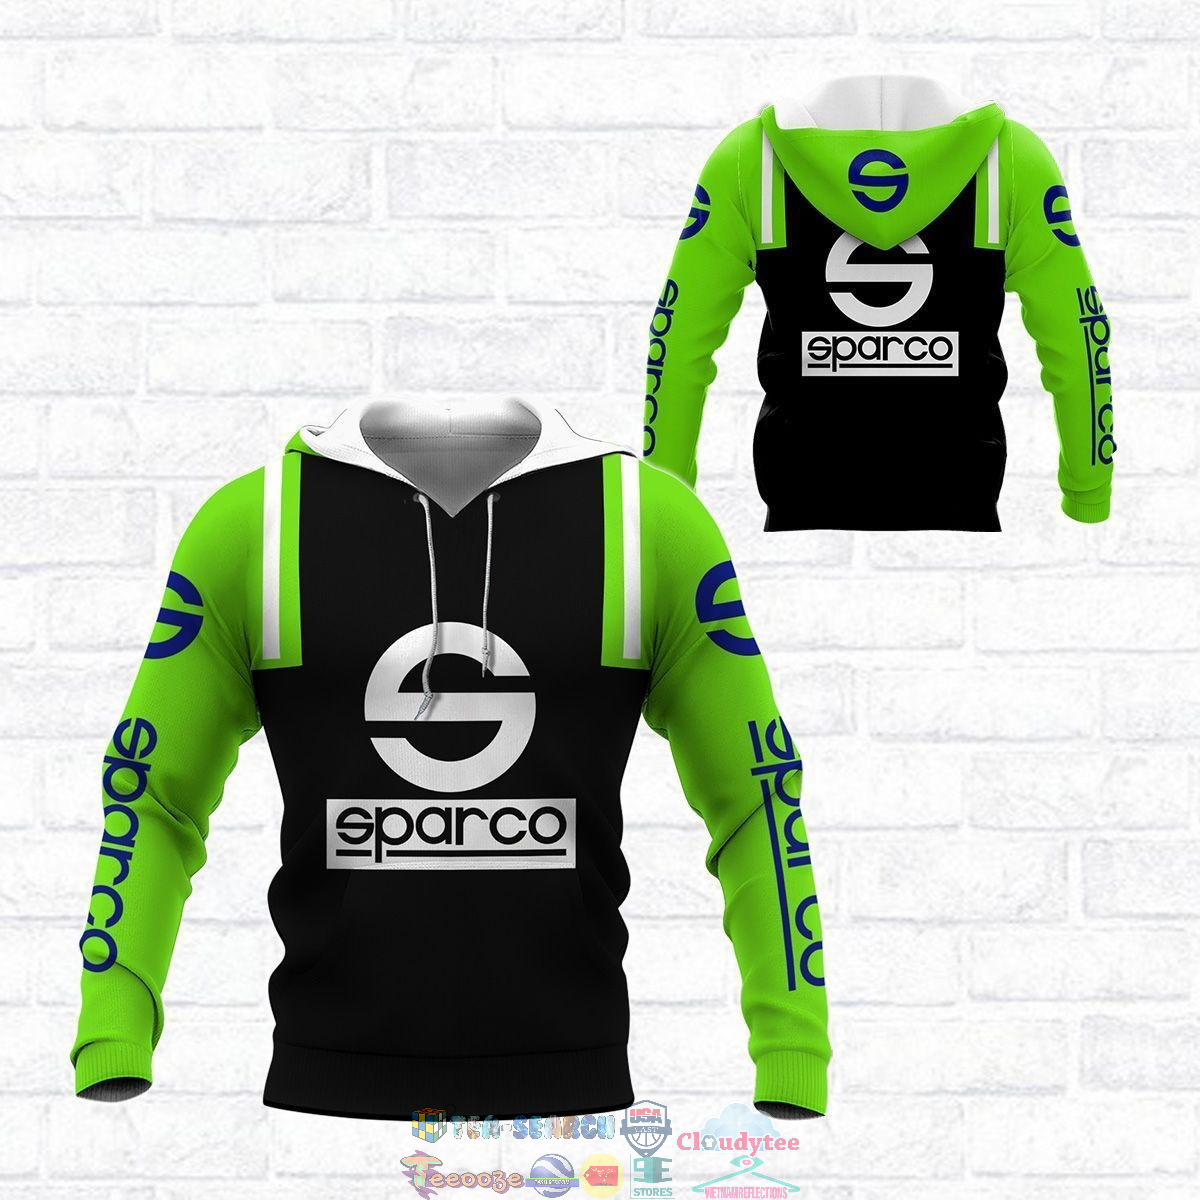 Sparco ver 59 3D hoodie and t-shirt